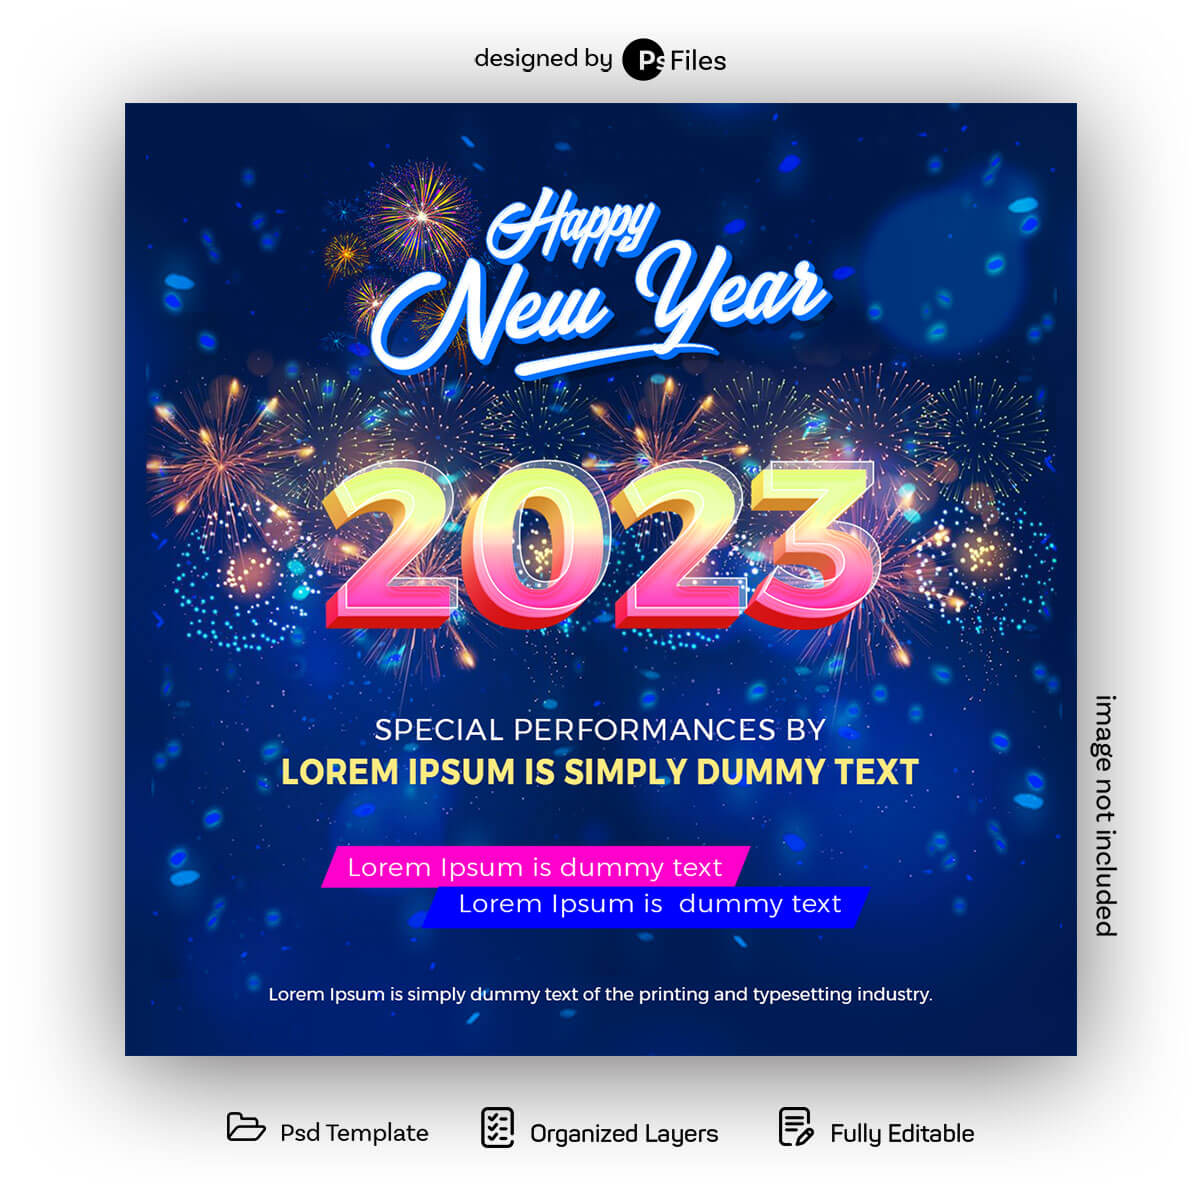 Blue coloe theme 2023 3D style Happy New Year Fire Crack Design PSD Template